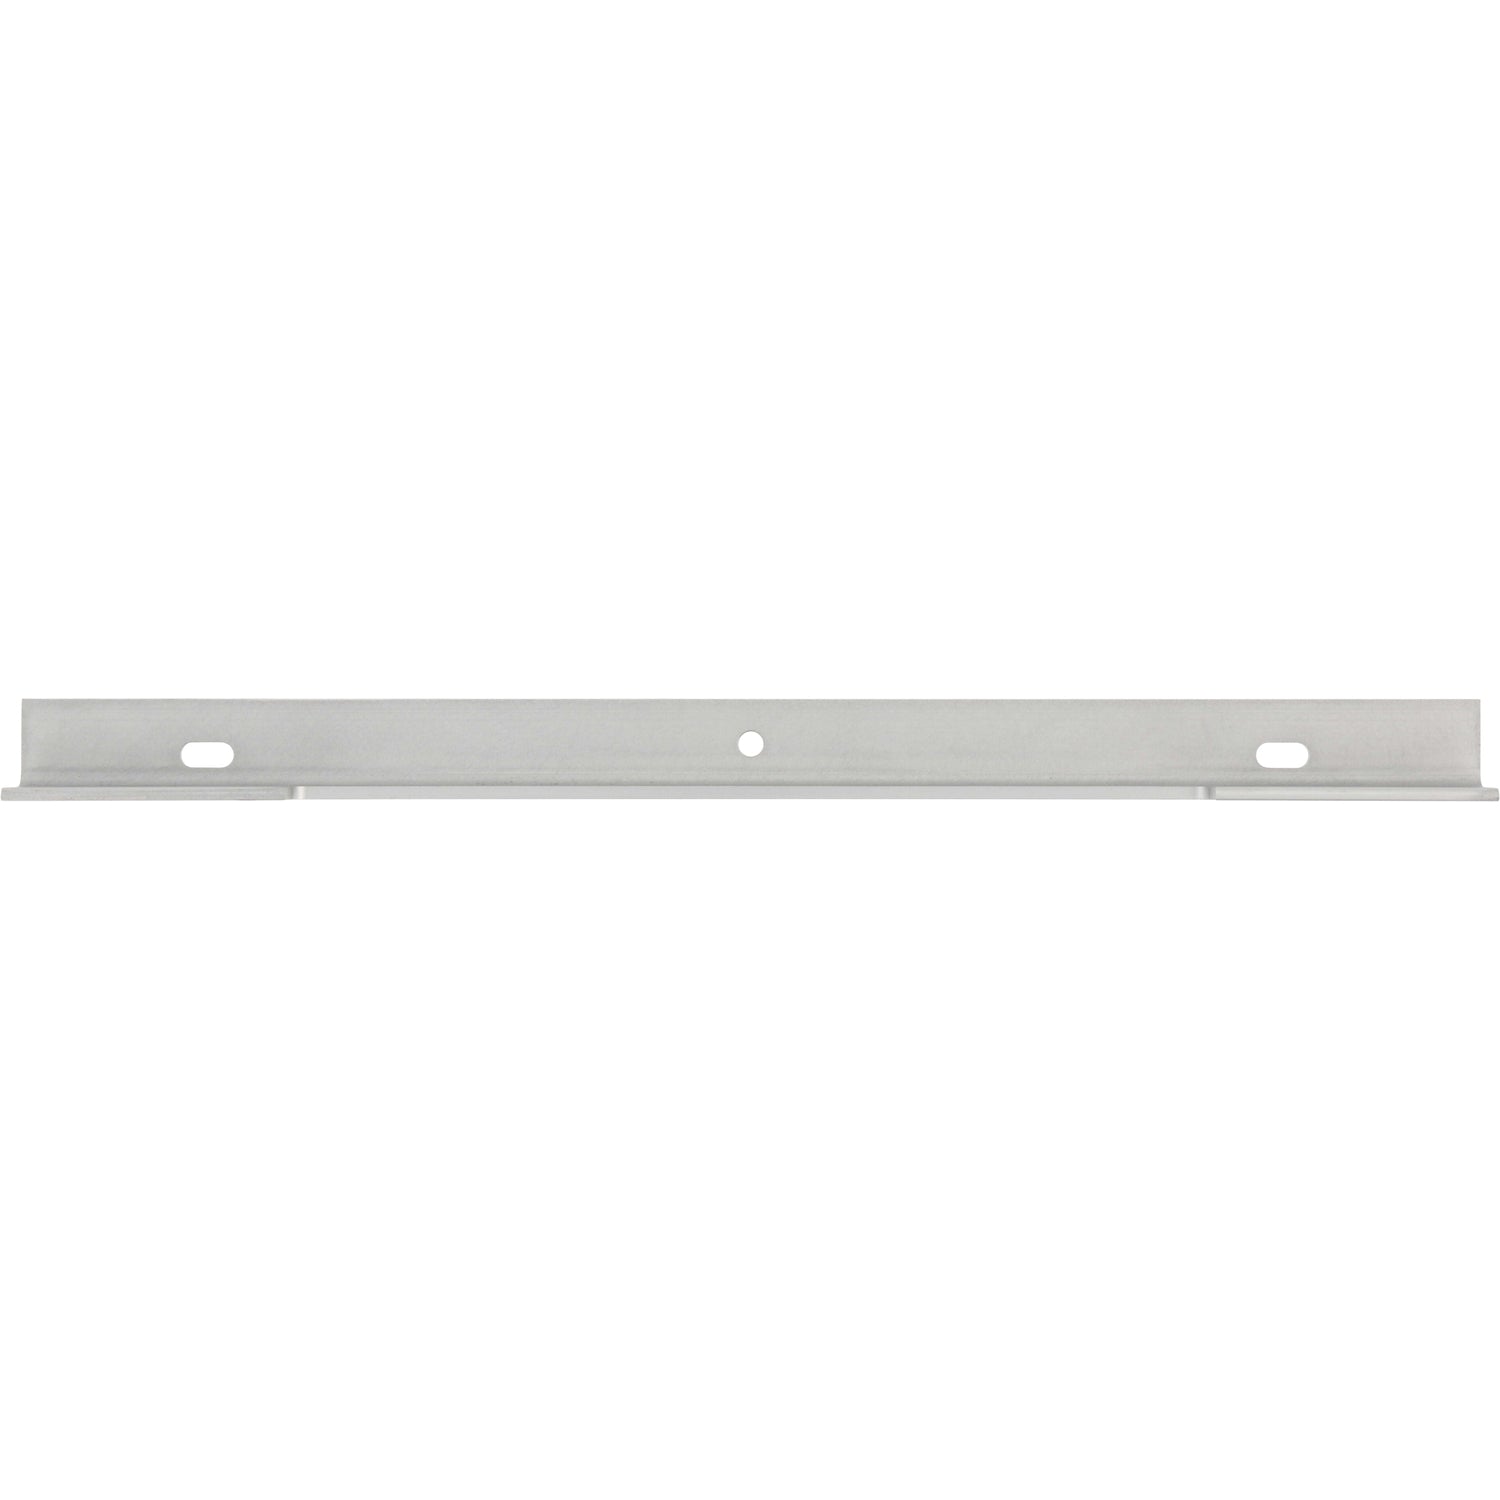 Grey hard anodized aluminum with 90 degree bend and multiple slotted mounting holes shown on white background. 